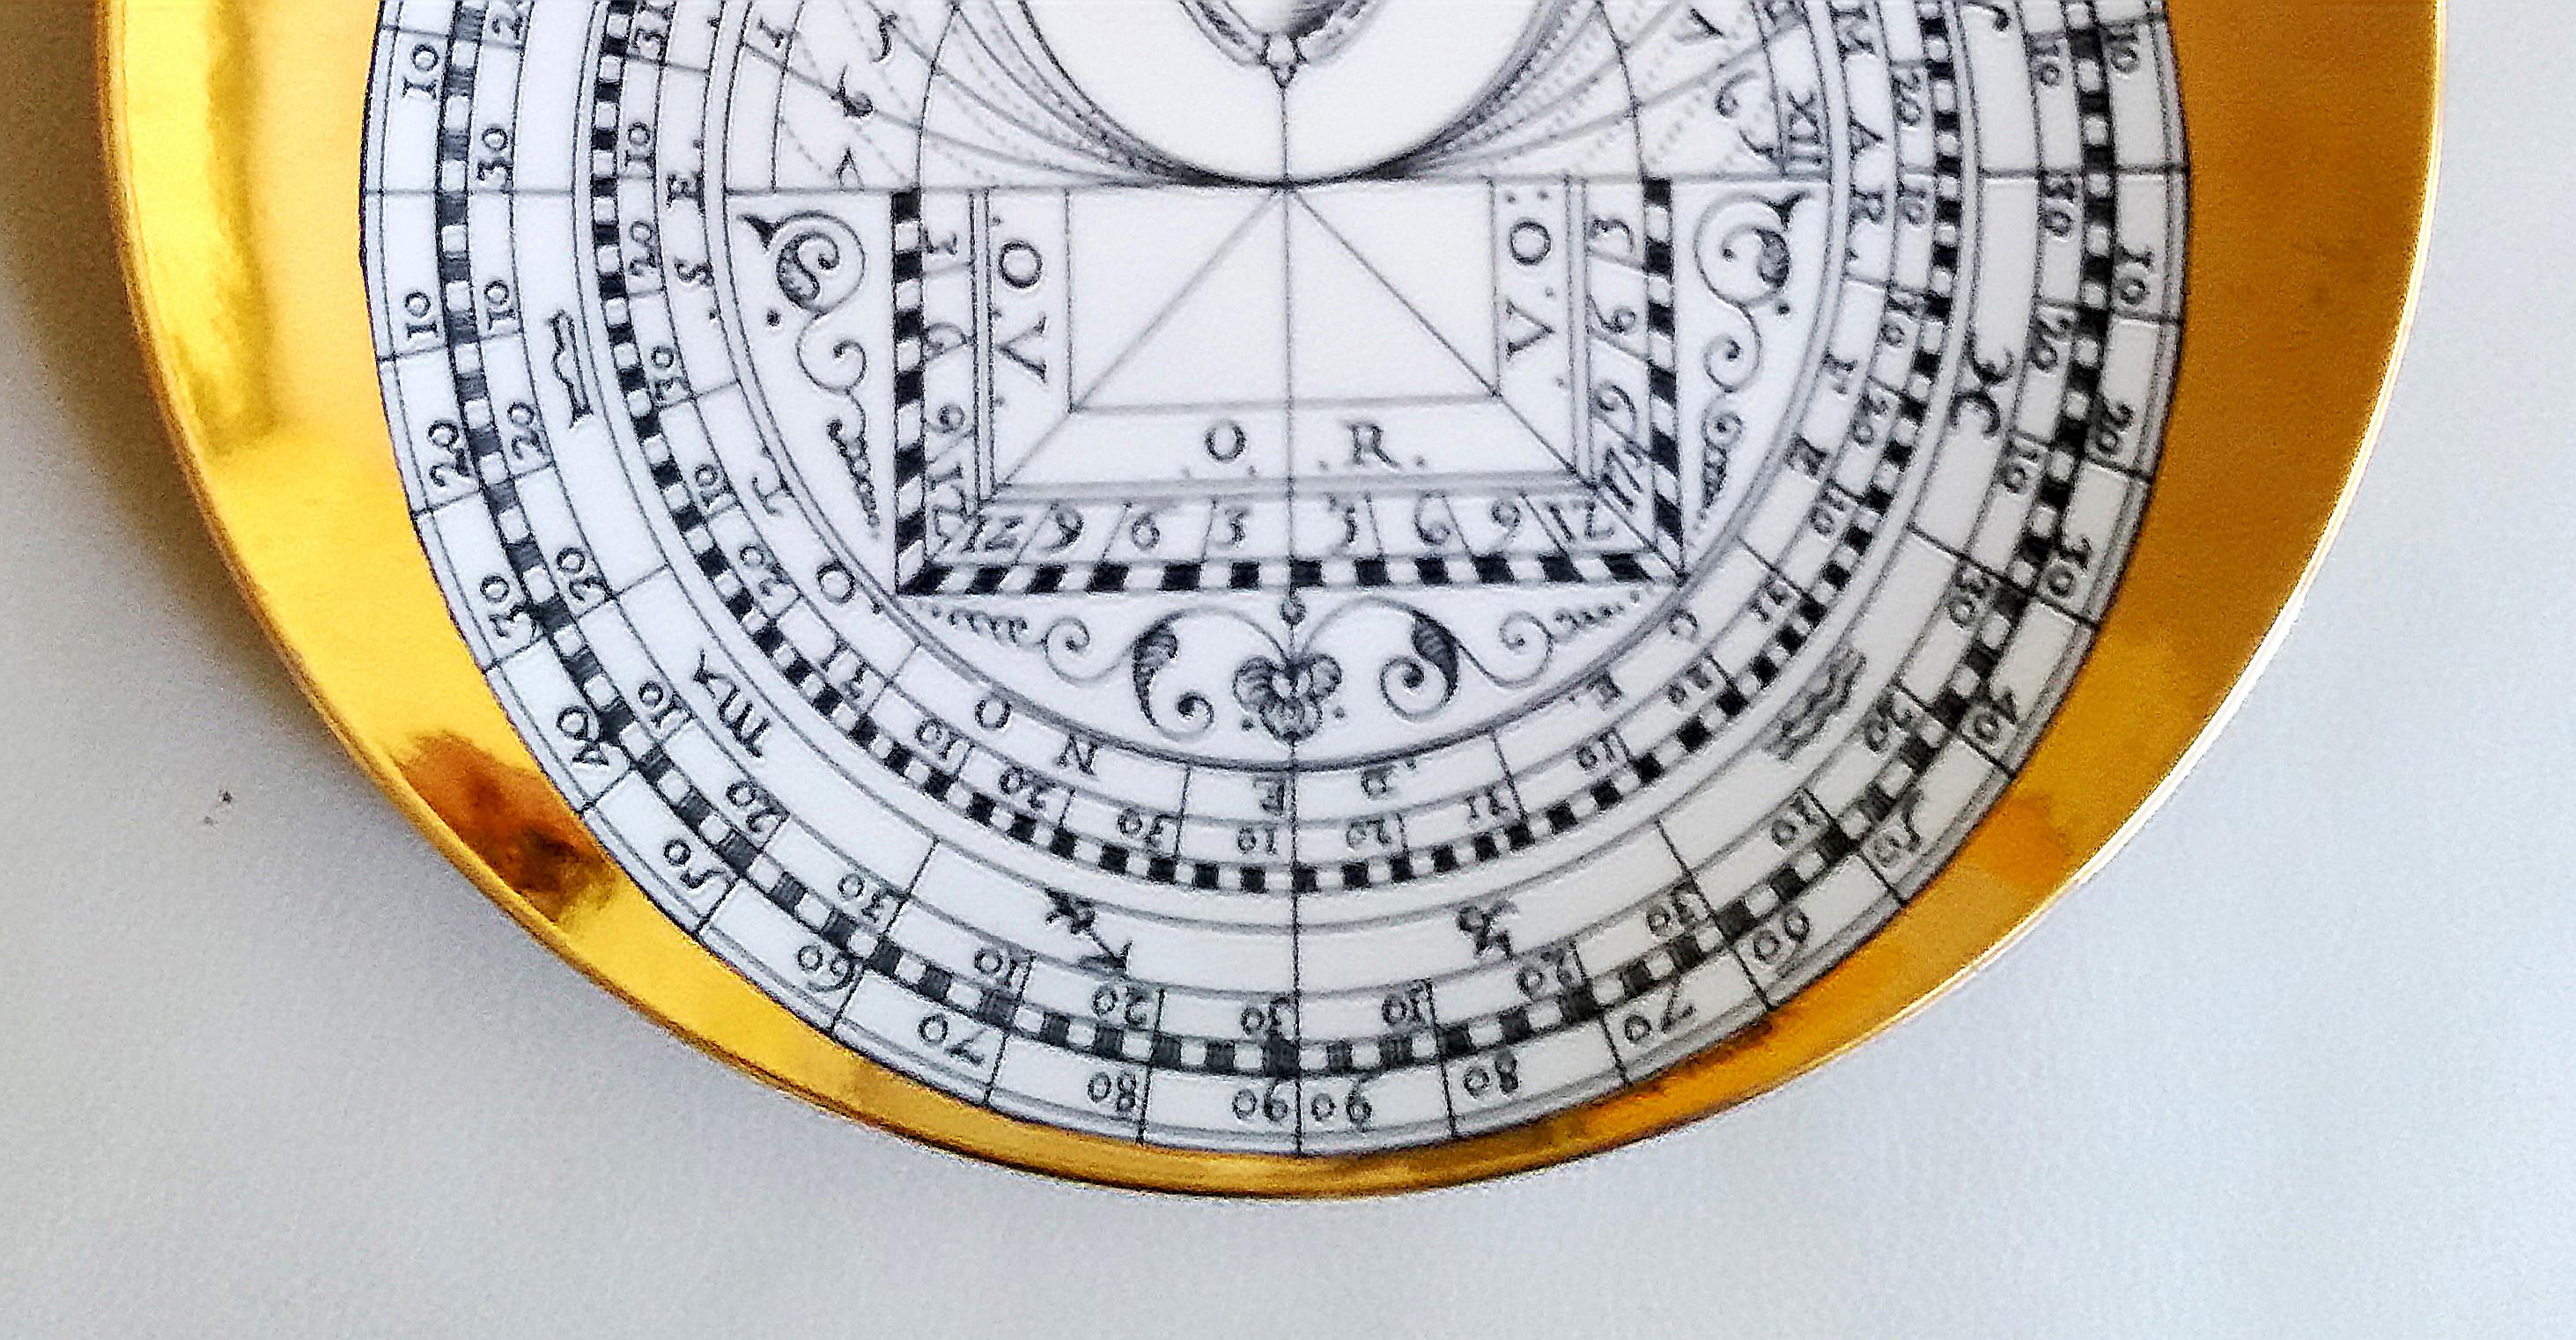 Vintage Piero Fornasetti astrolabe porcelain plate,
Dated 1966

The bronze gilt plate has a central panel in black and white depicting a celestial globe with panels containing numbers and a central armorial device surmounted with a banner reading